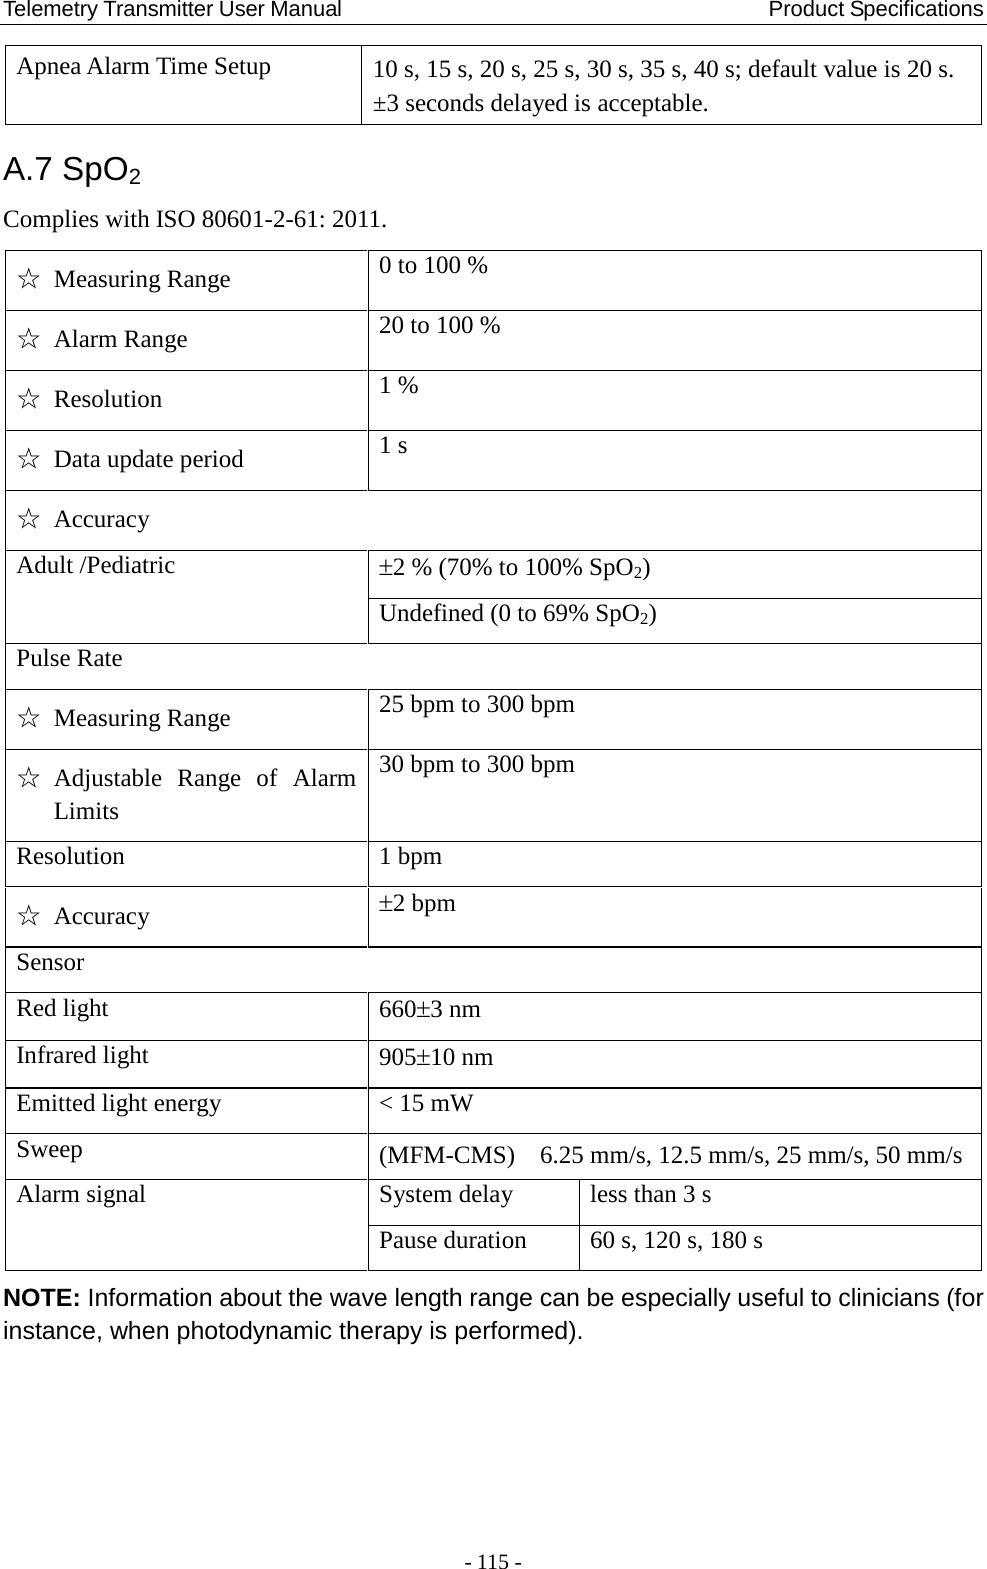 Telemetry Transmitter User Manual                                       Product Specifications   Apnea Alarm Time Setup 10 s, 15 s, 20 s, 25 s, 30 s, 35 s, 40 s; default value is 20 s. ±3 seconds delayed is acceptable. A.7 SpO2 Complies with ISO 80601-2-61: 2011.   ☆ Measuring Range 0 to 100 % ☆ Alarm Range 20 to 100 % ☆ Resolution 1 % ☆ Data update period 1 s ☆ Accuracy Adult /Pediatric ±2 % (70% to 100% SpO2) Undefined (0 to 69% SpO2) Pulse Rate   ☆ Measuring Range 25 bpm to 300 bpm ☆ Adjustable Range of Alarm Limits 30 bpm to 300 bpm Resolution 1 bpm ☆ Accuracy ±2 bpm   Sensor Red light 660±3 nm Infrared light 905±10 nm Emitted light energy &lt; 15 mW Sweep (MFM-CMS)  6.25 mm/s, 12.5 mm/s, 25 mm/s, 50 mm/s Alarm signal System delay less than 3 s Pause duration 60 s, 120 s, 180 s NOTE: Information about the wave length range can be especially useful to clinicians (for instance, when photodynamic therapy is performed). - 115 - 